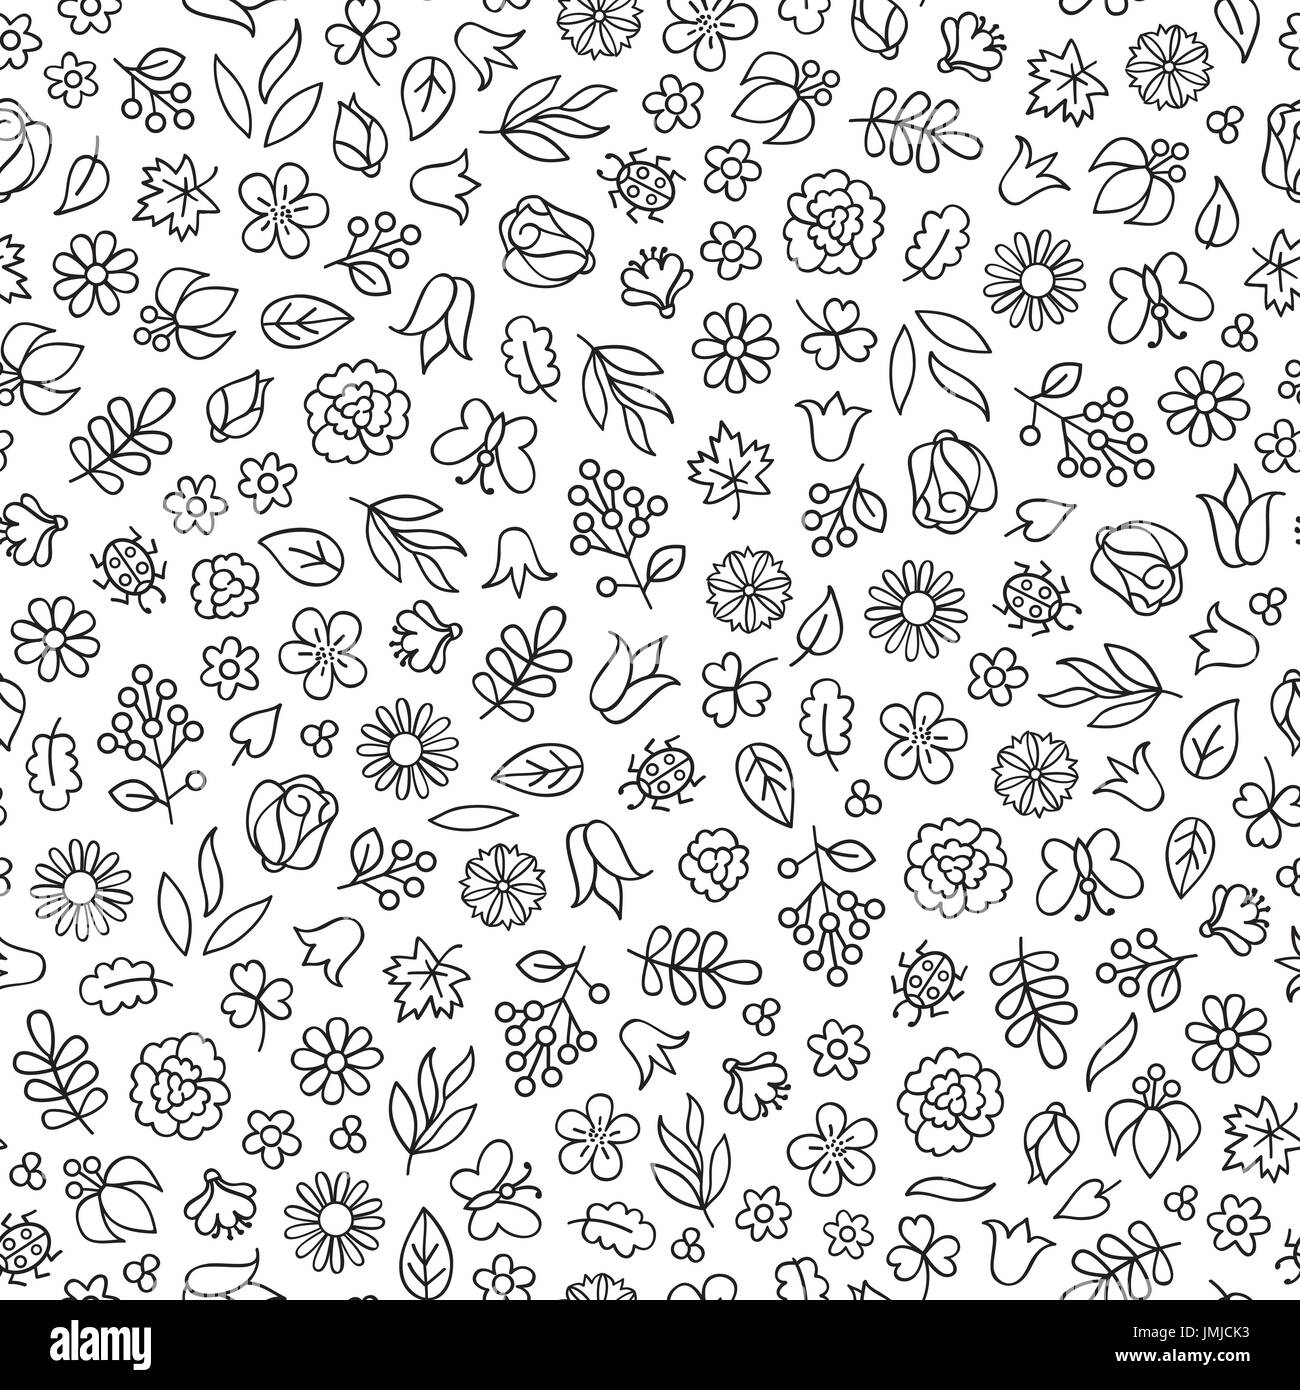 Flower icon seamless pattern. Floral leaves and flowers white